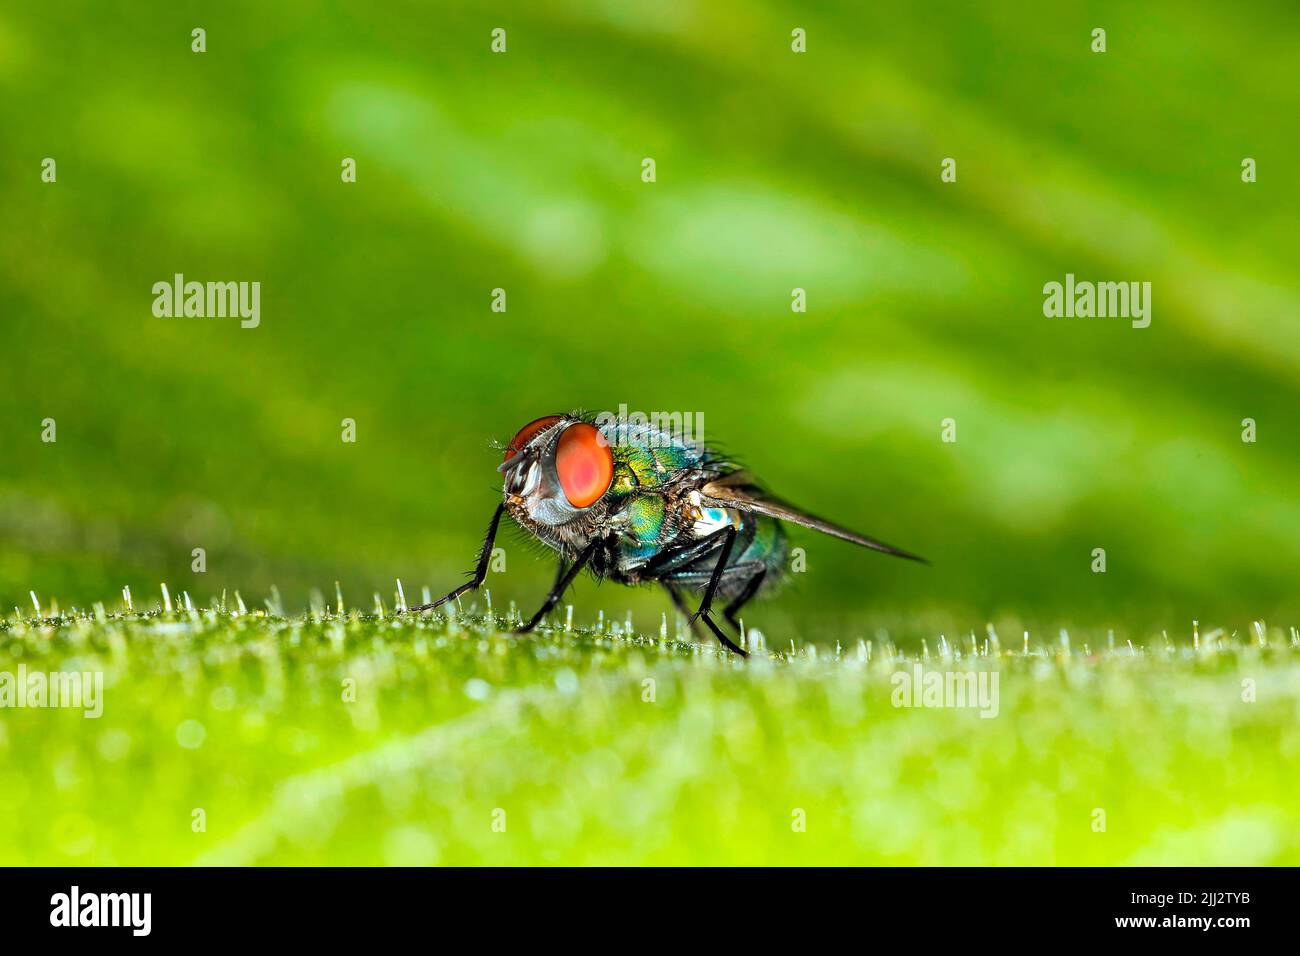 Blow fly, blow-fly, carrion fly, bluebottle, greenbottle, or cluster fly, Germany Stock Photo